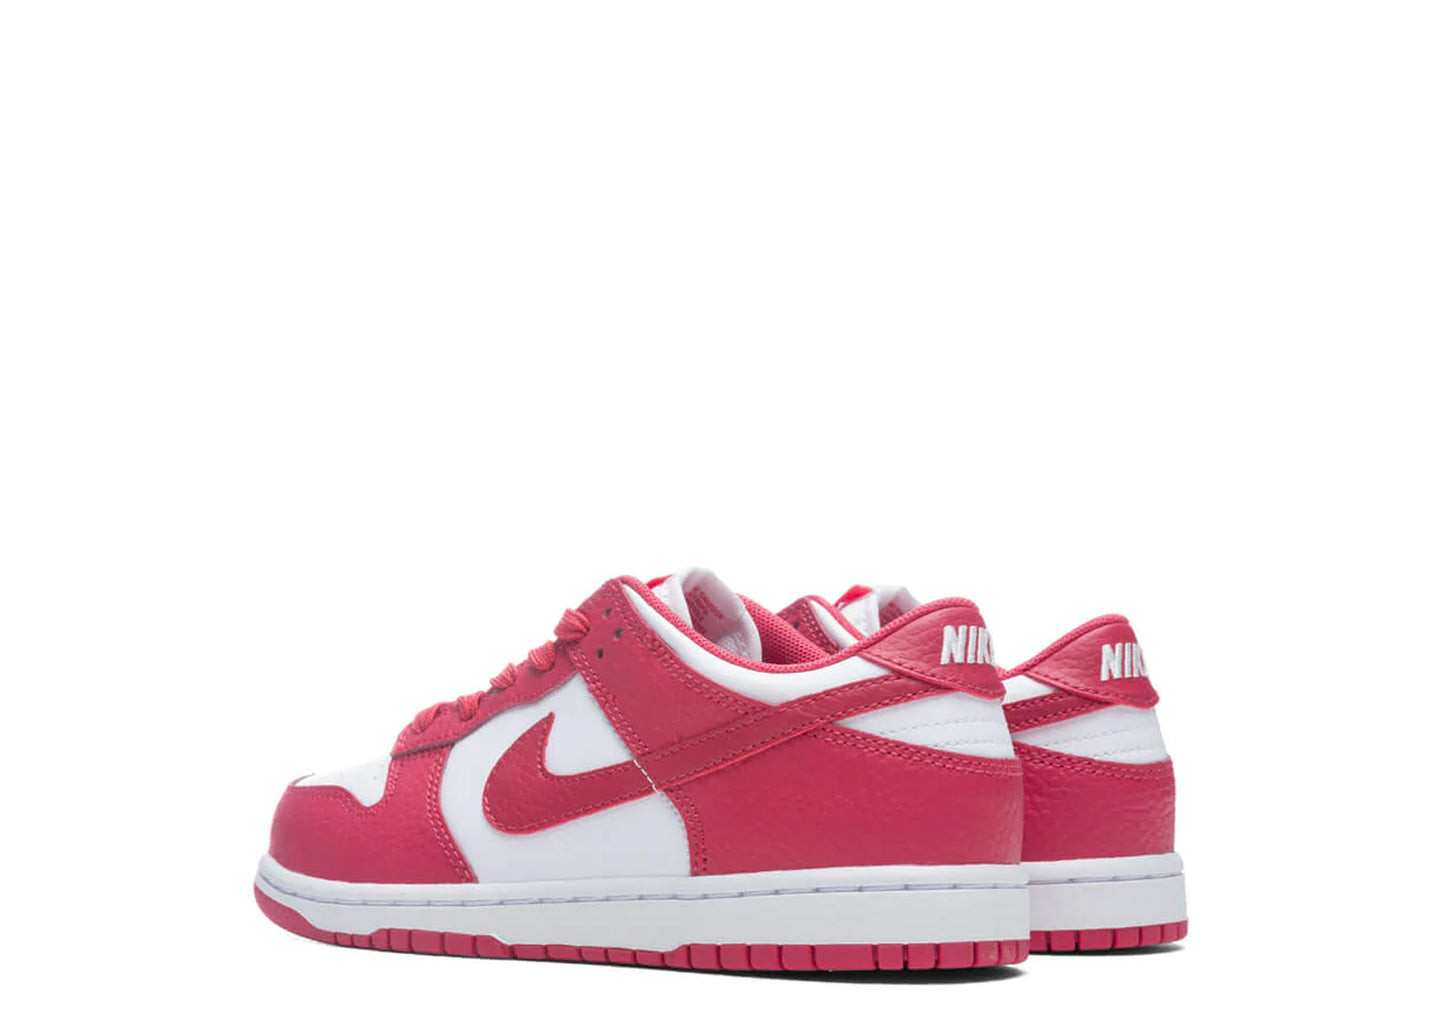 Nike Dunk Low PS "Gypsy Rose"